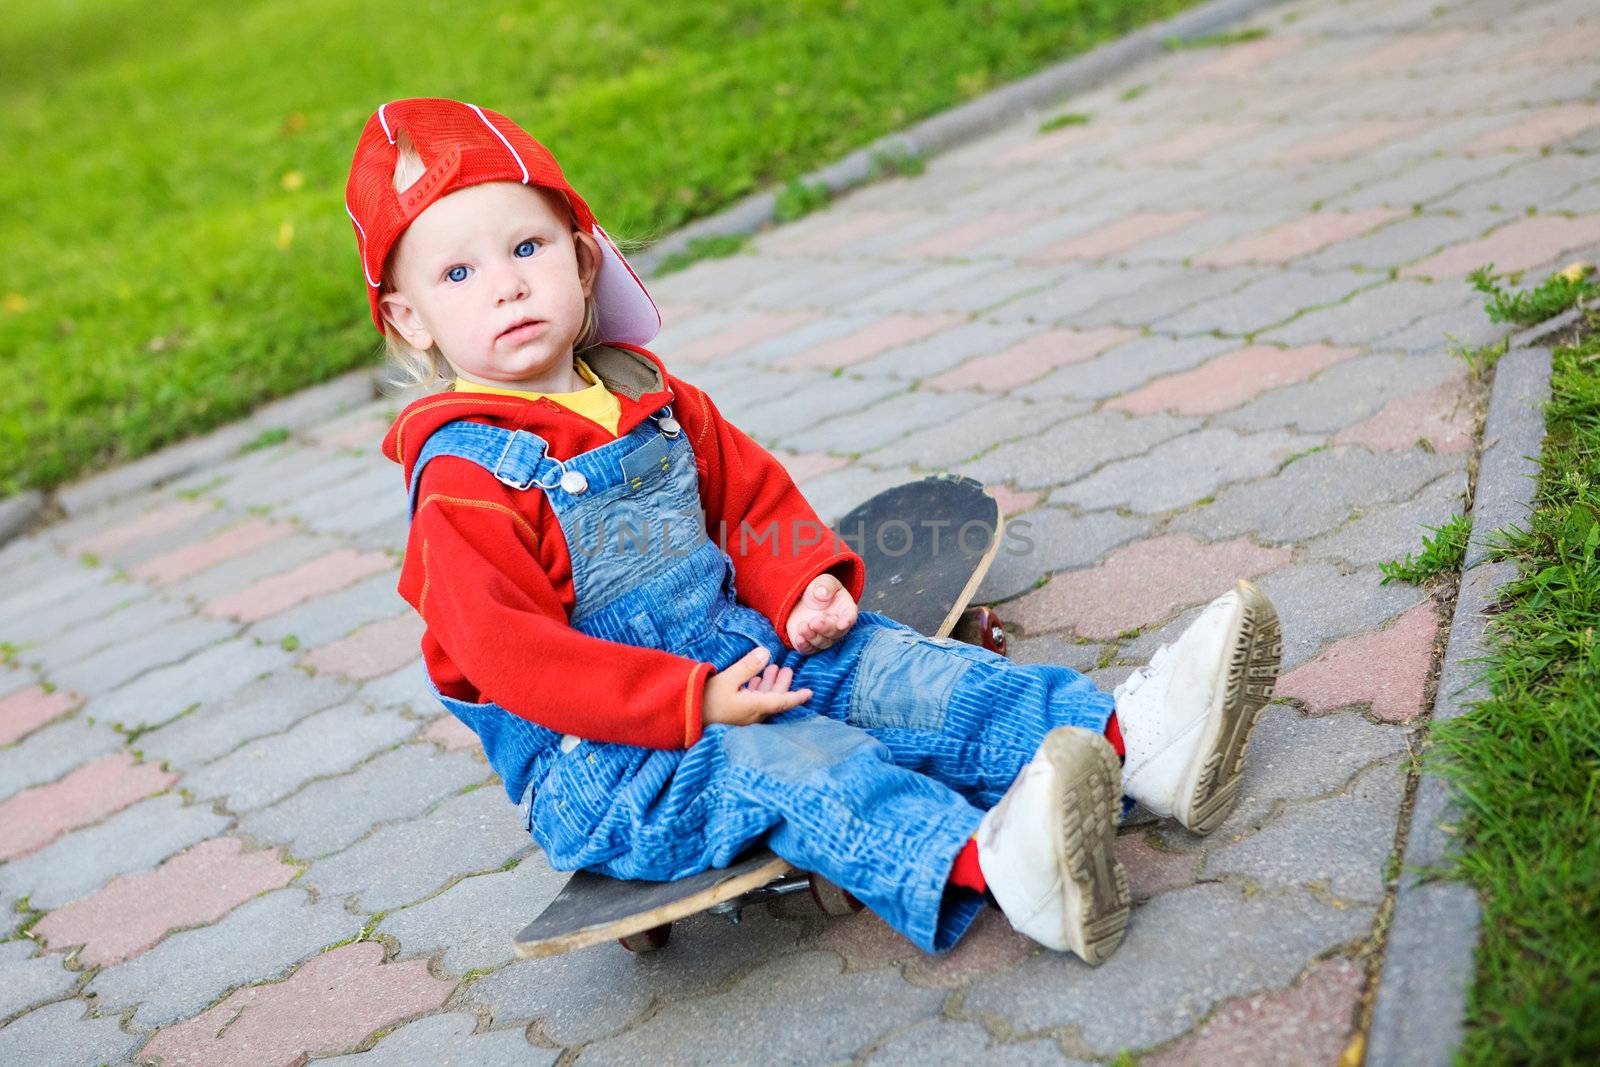 child of 2 years old sitting on the skateboard